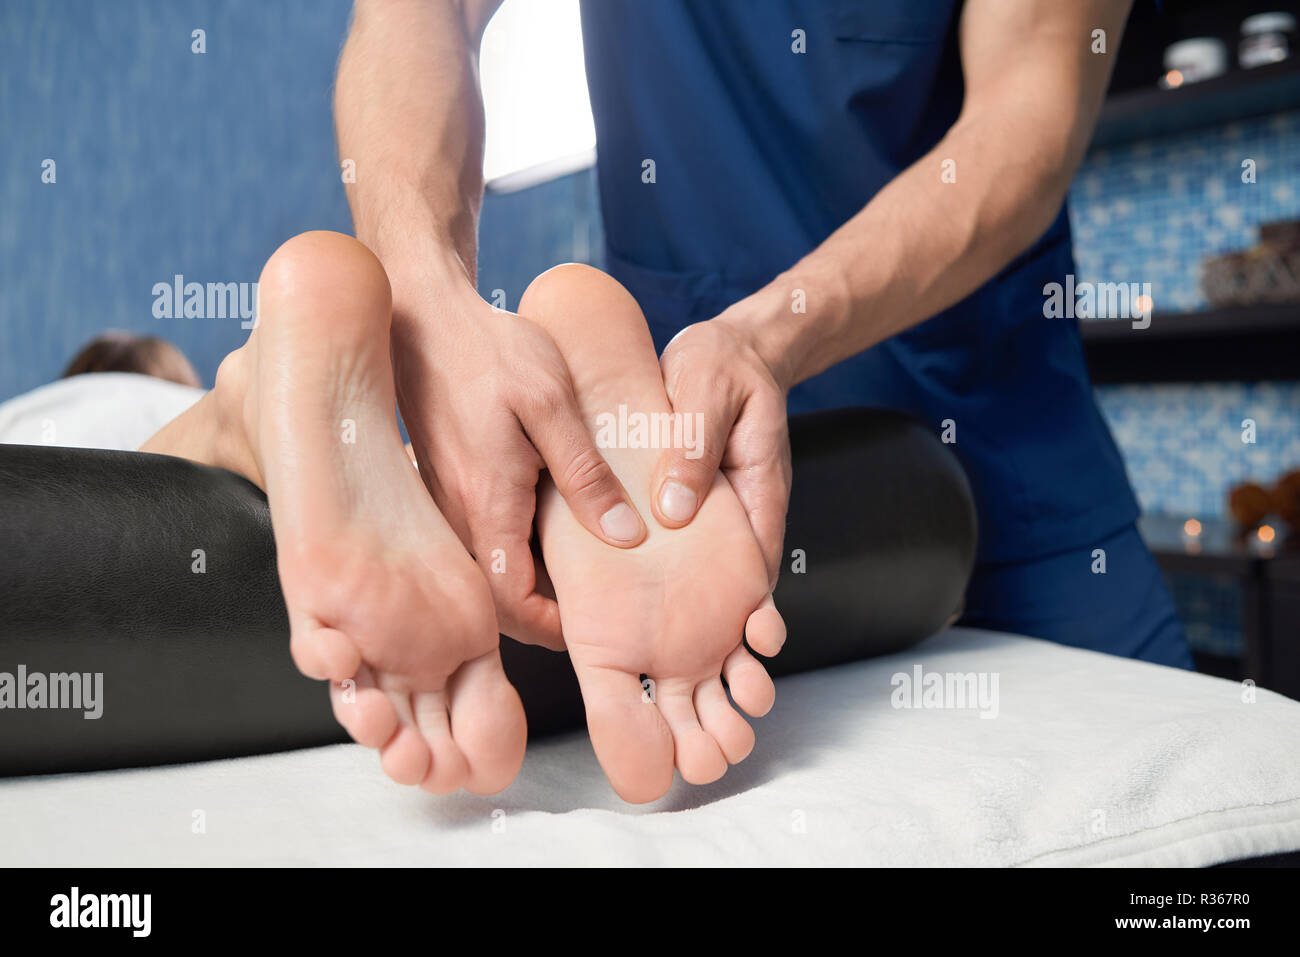 Closeup of hands of qualified masseur massaging foot of  female client in spa cosmetology salon. Woman lying on couch, relaxing and enjoying during healthy procedure. Concept of body care. Stock Photo